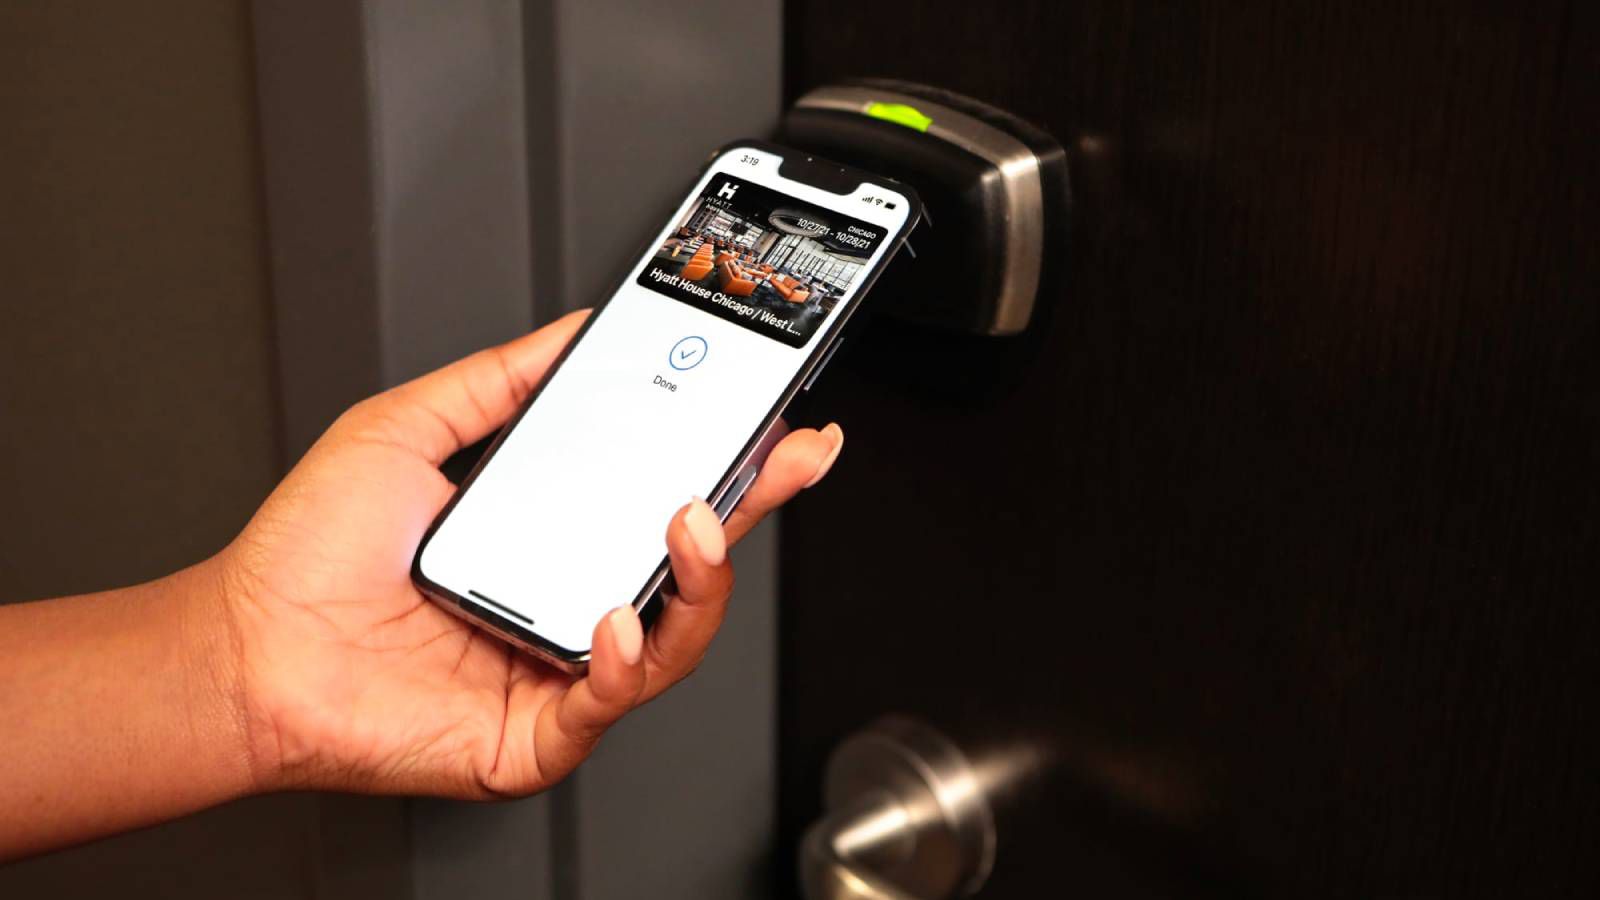 Here's a First Look at the iPhone's Convenient Hotel Room Key Feature